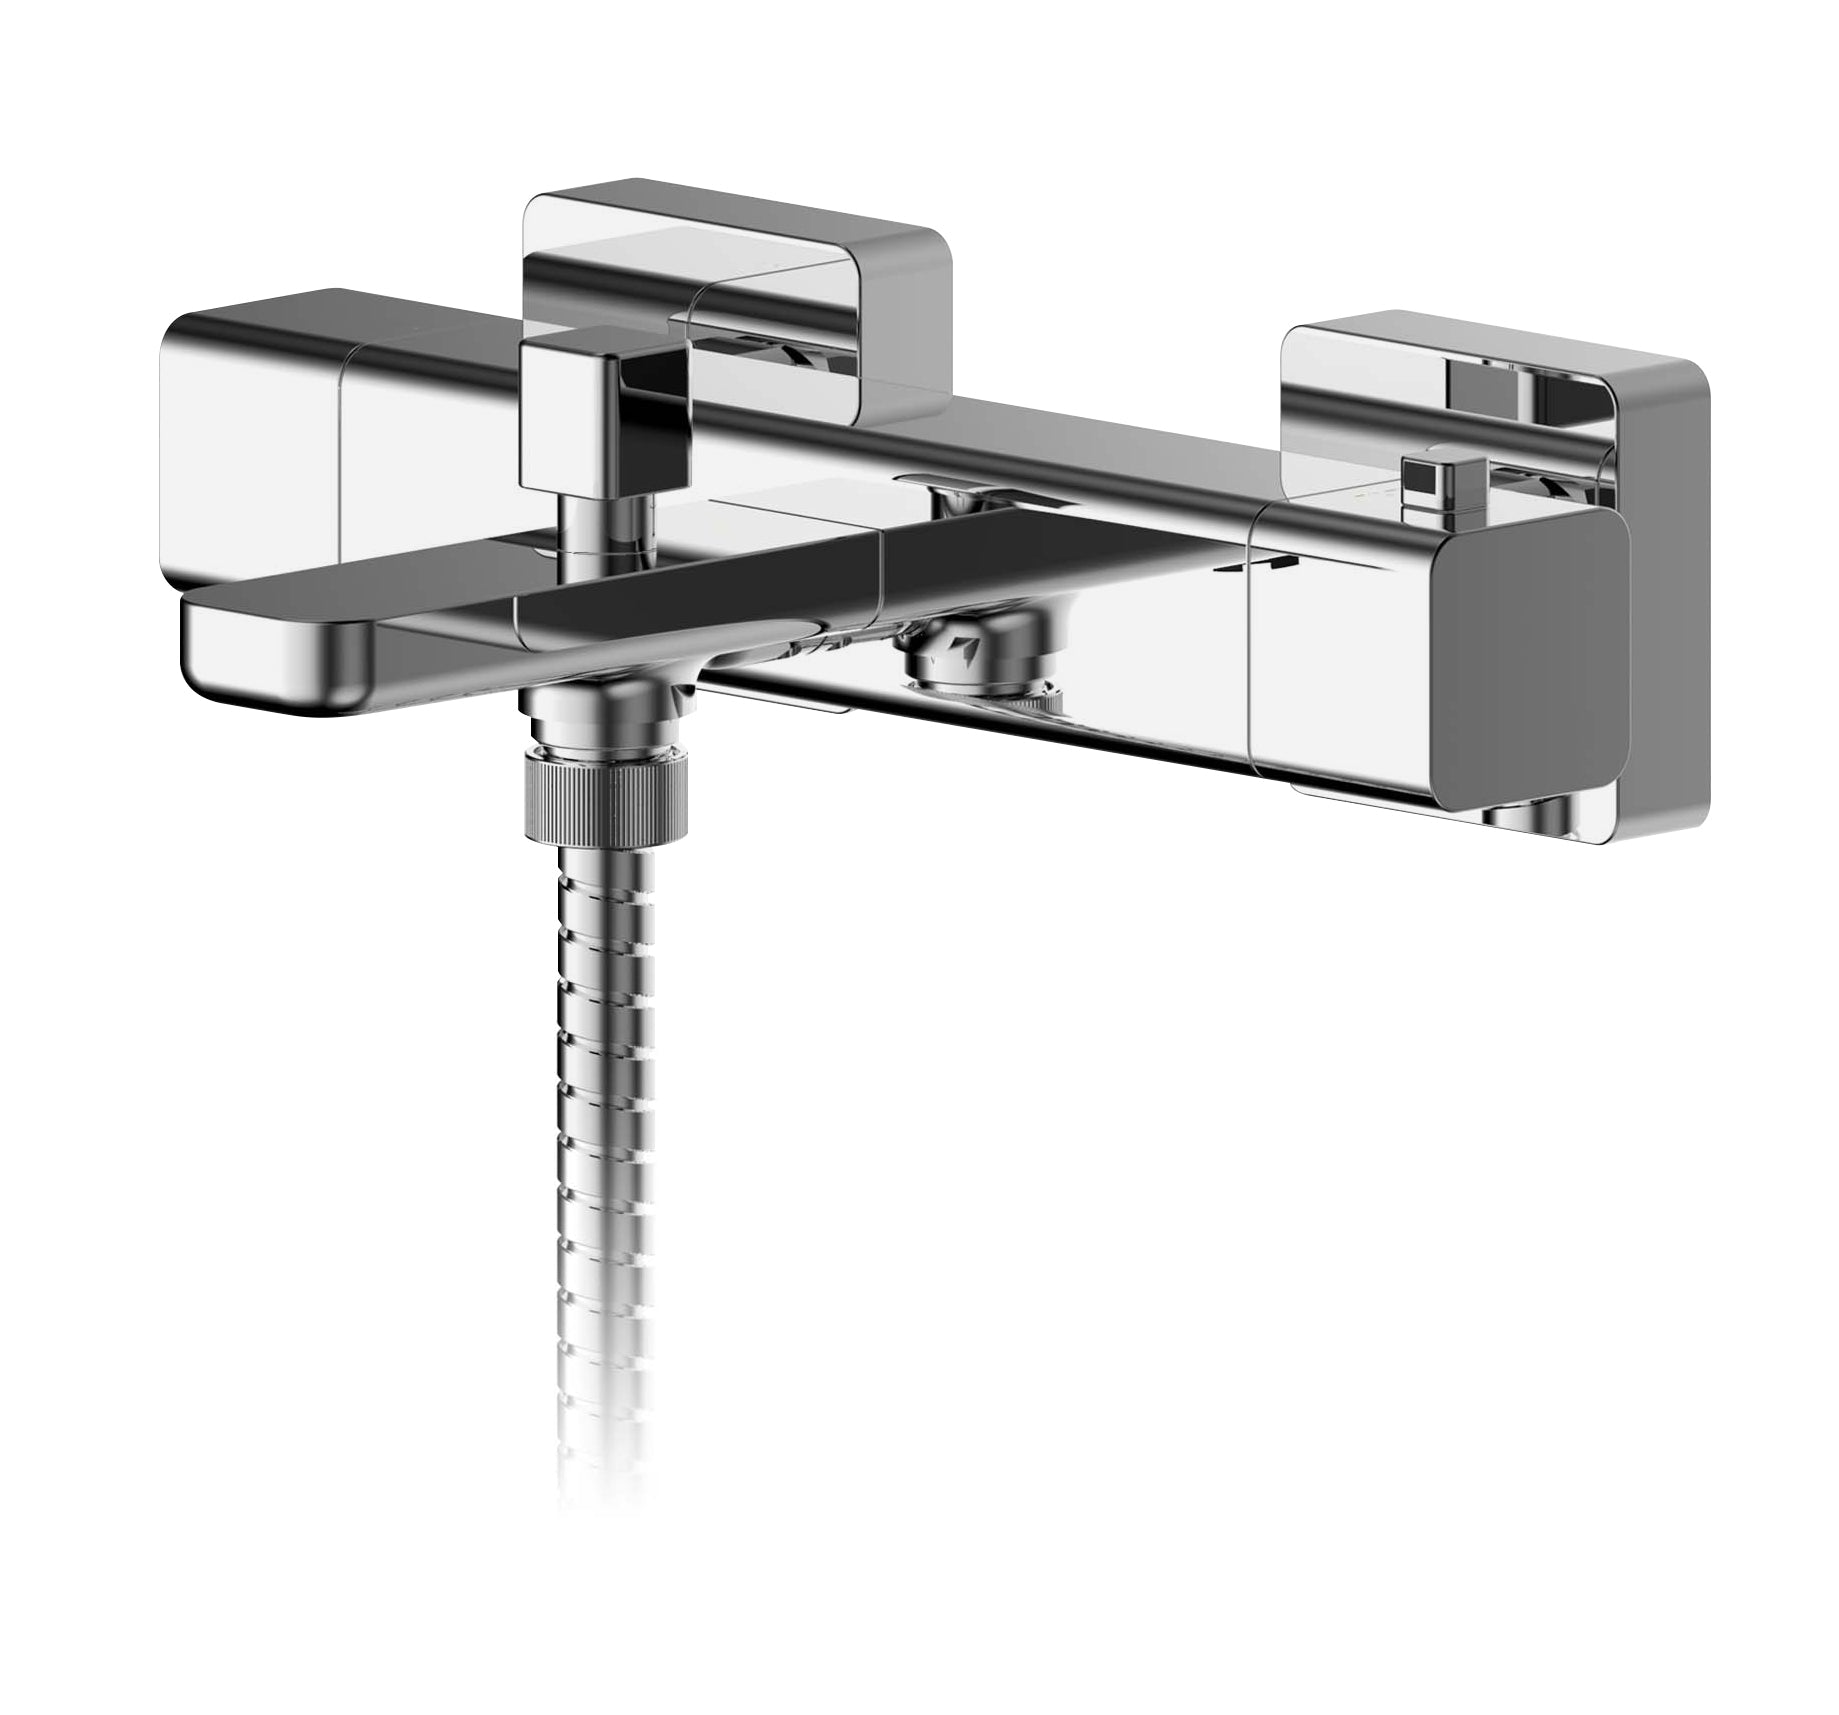 Nuie Windon Wall Mounted Thermostatic Bath Shower Mixer